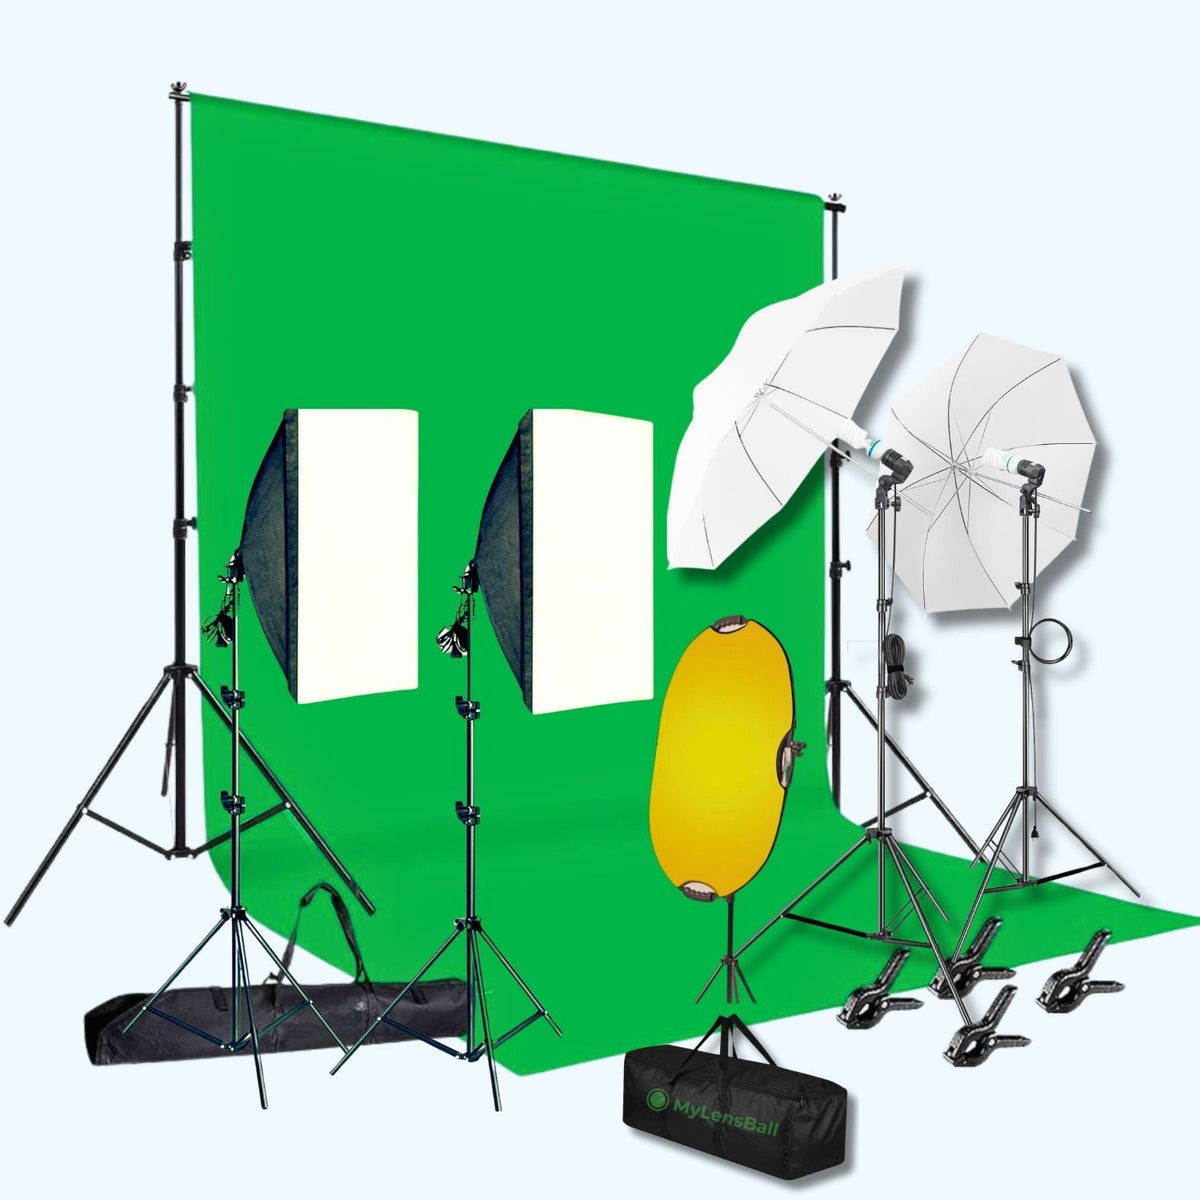 Introducing ProFlex Studio Lighting by MyLensBall: Elevate Your Photography & Videography